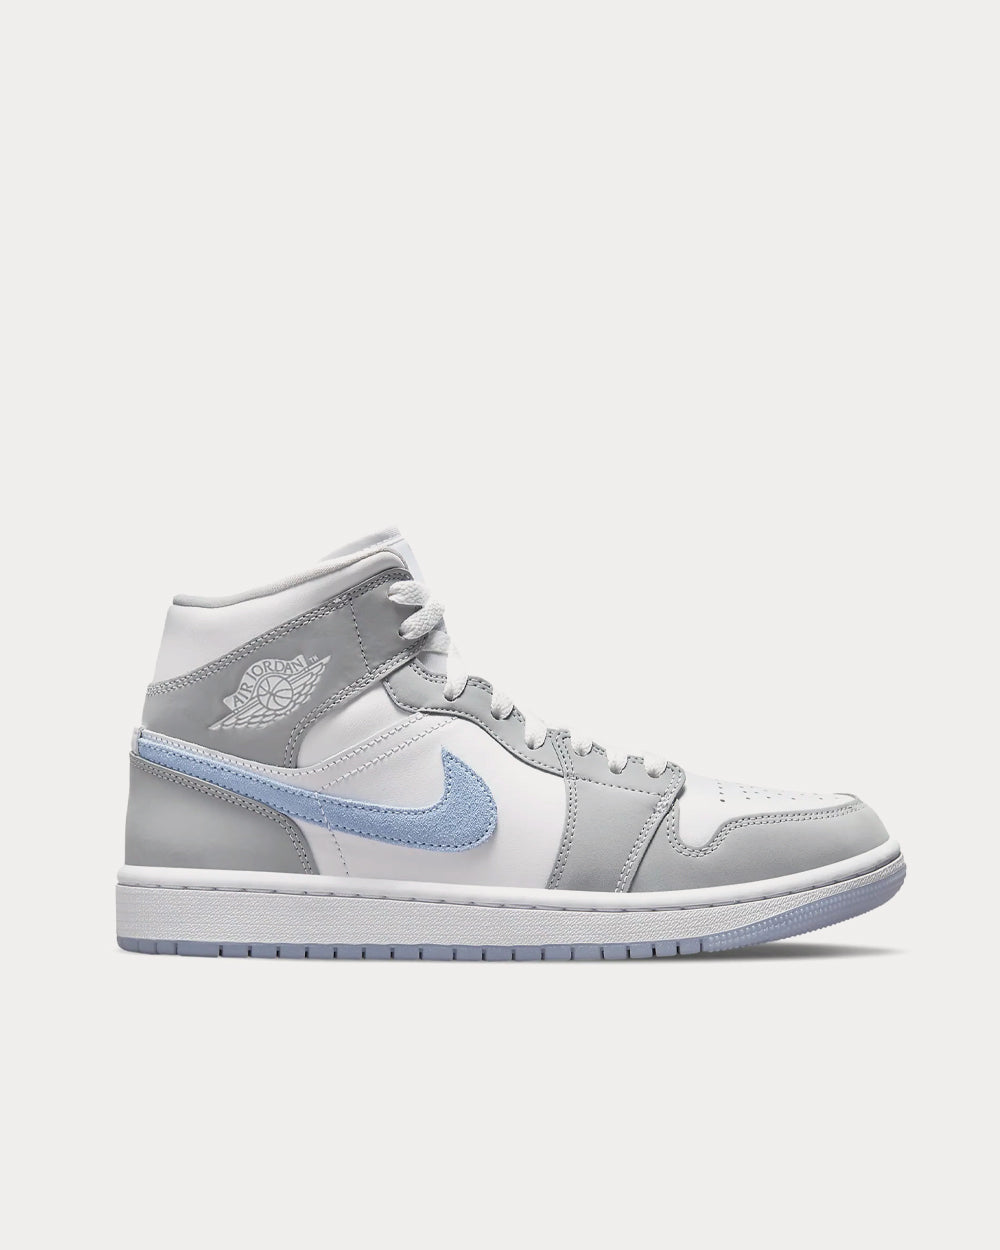 Look For The Air Jordan 1 Mid Light Smoke Grey To Release Soon